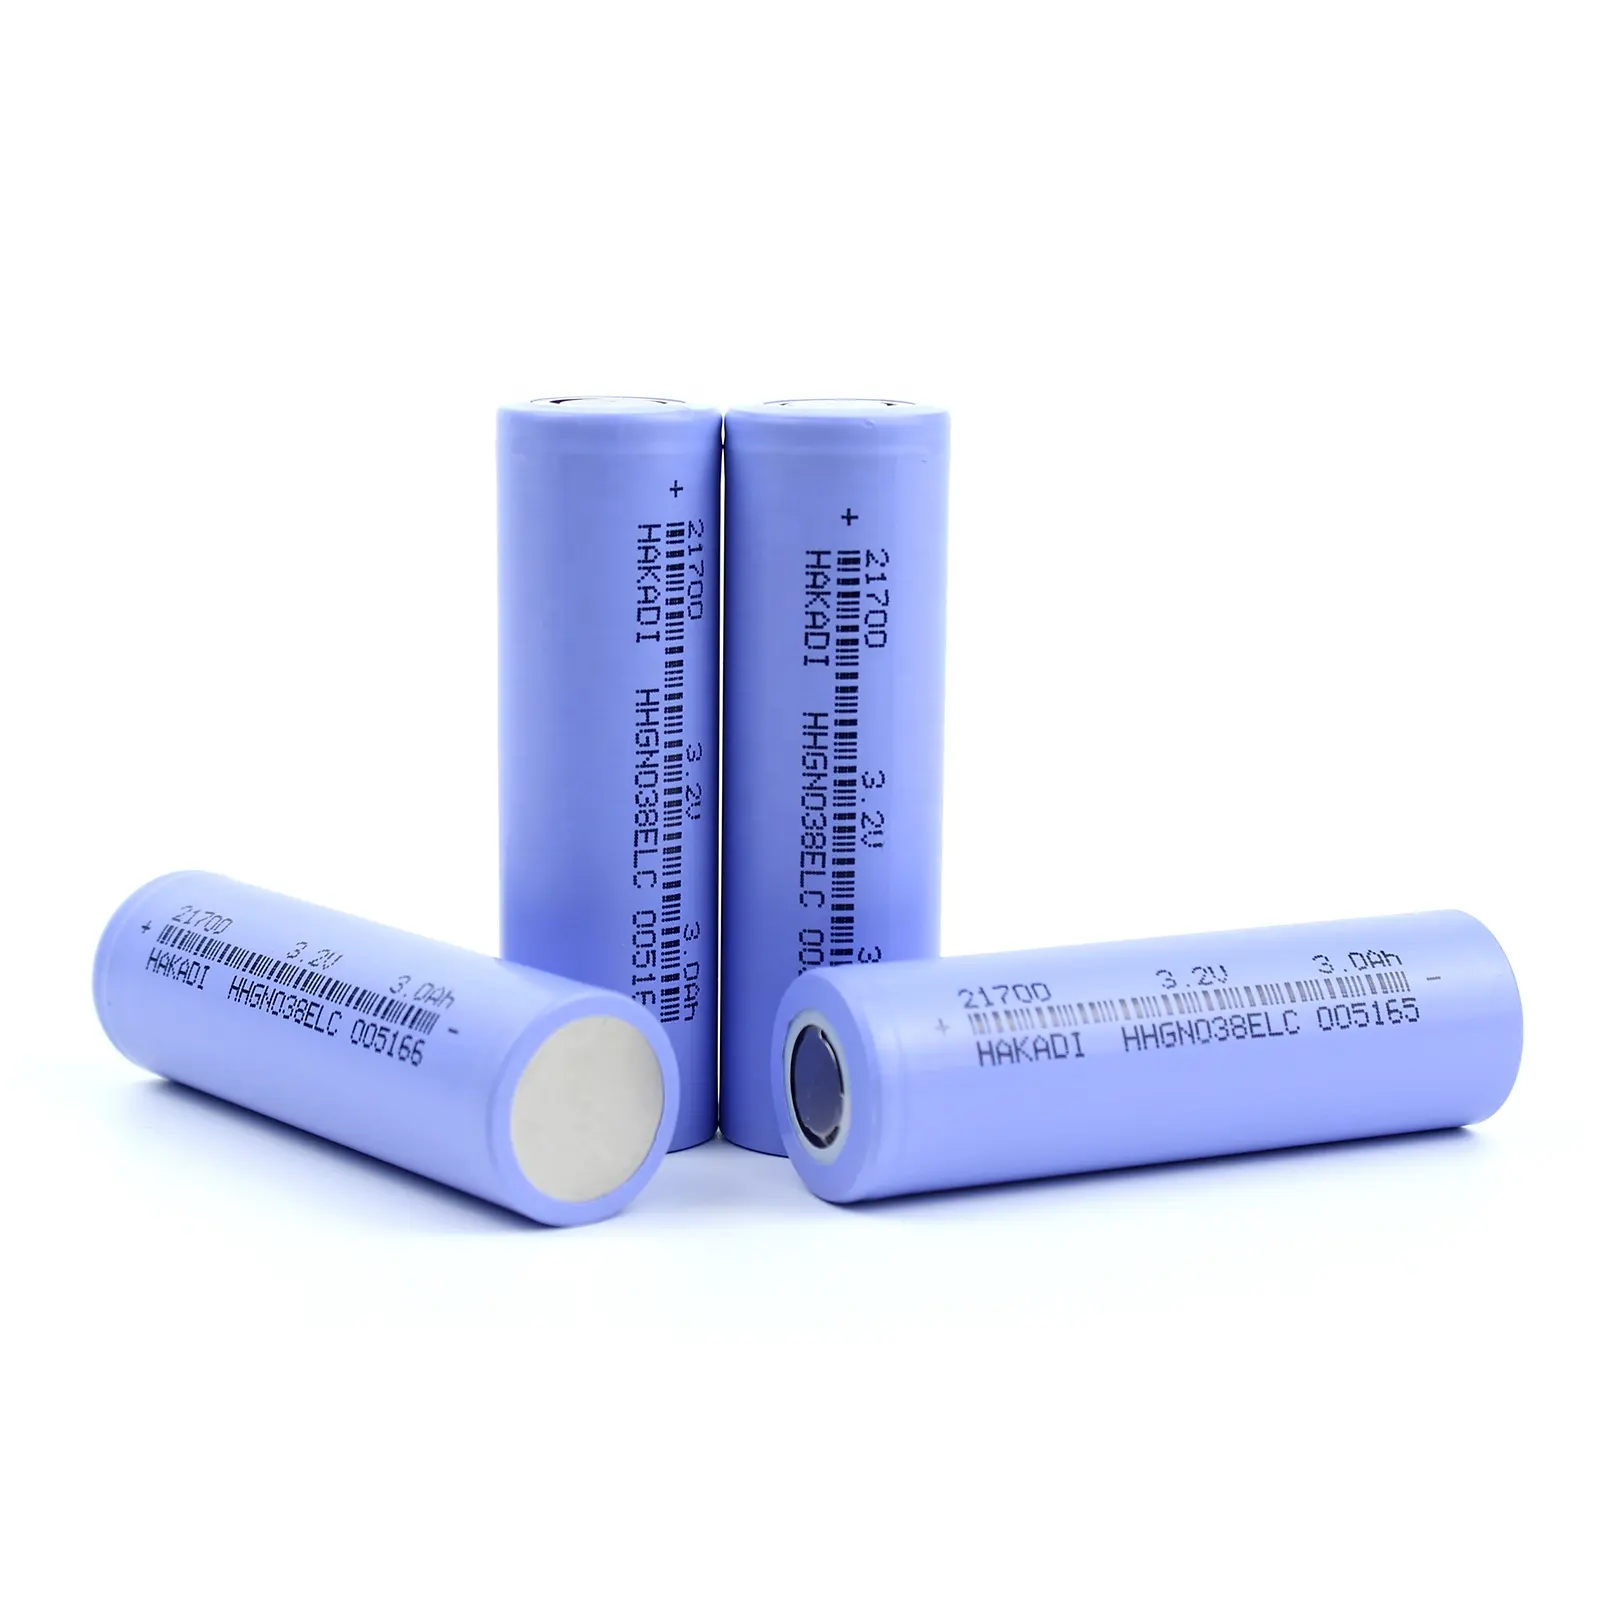 China Factory 21700 3.2V3000mAh LiFePO4 good price Cylindrical cell For Power bank, microphone, headlight, EV, E-Scooter